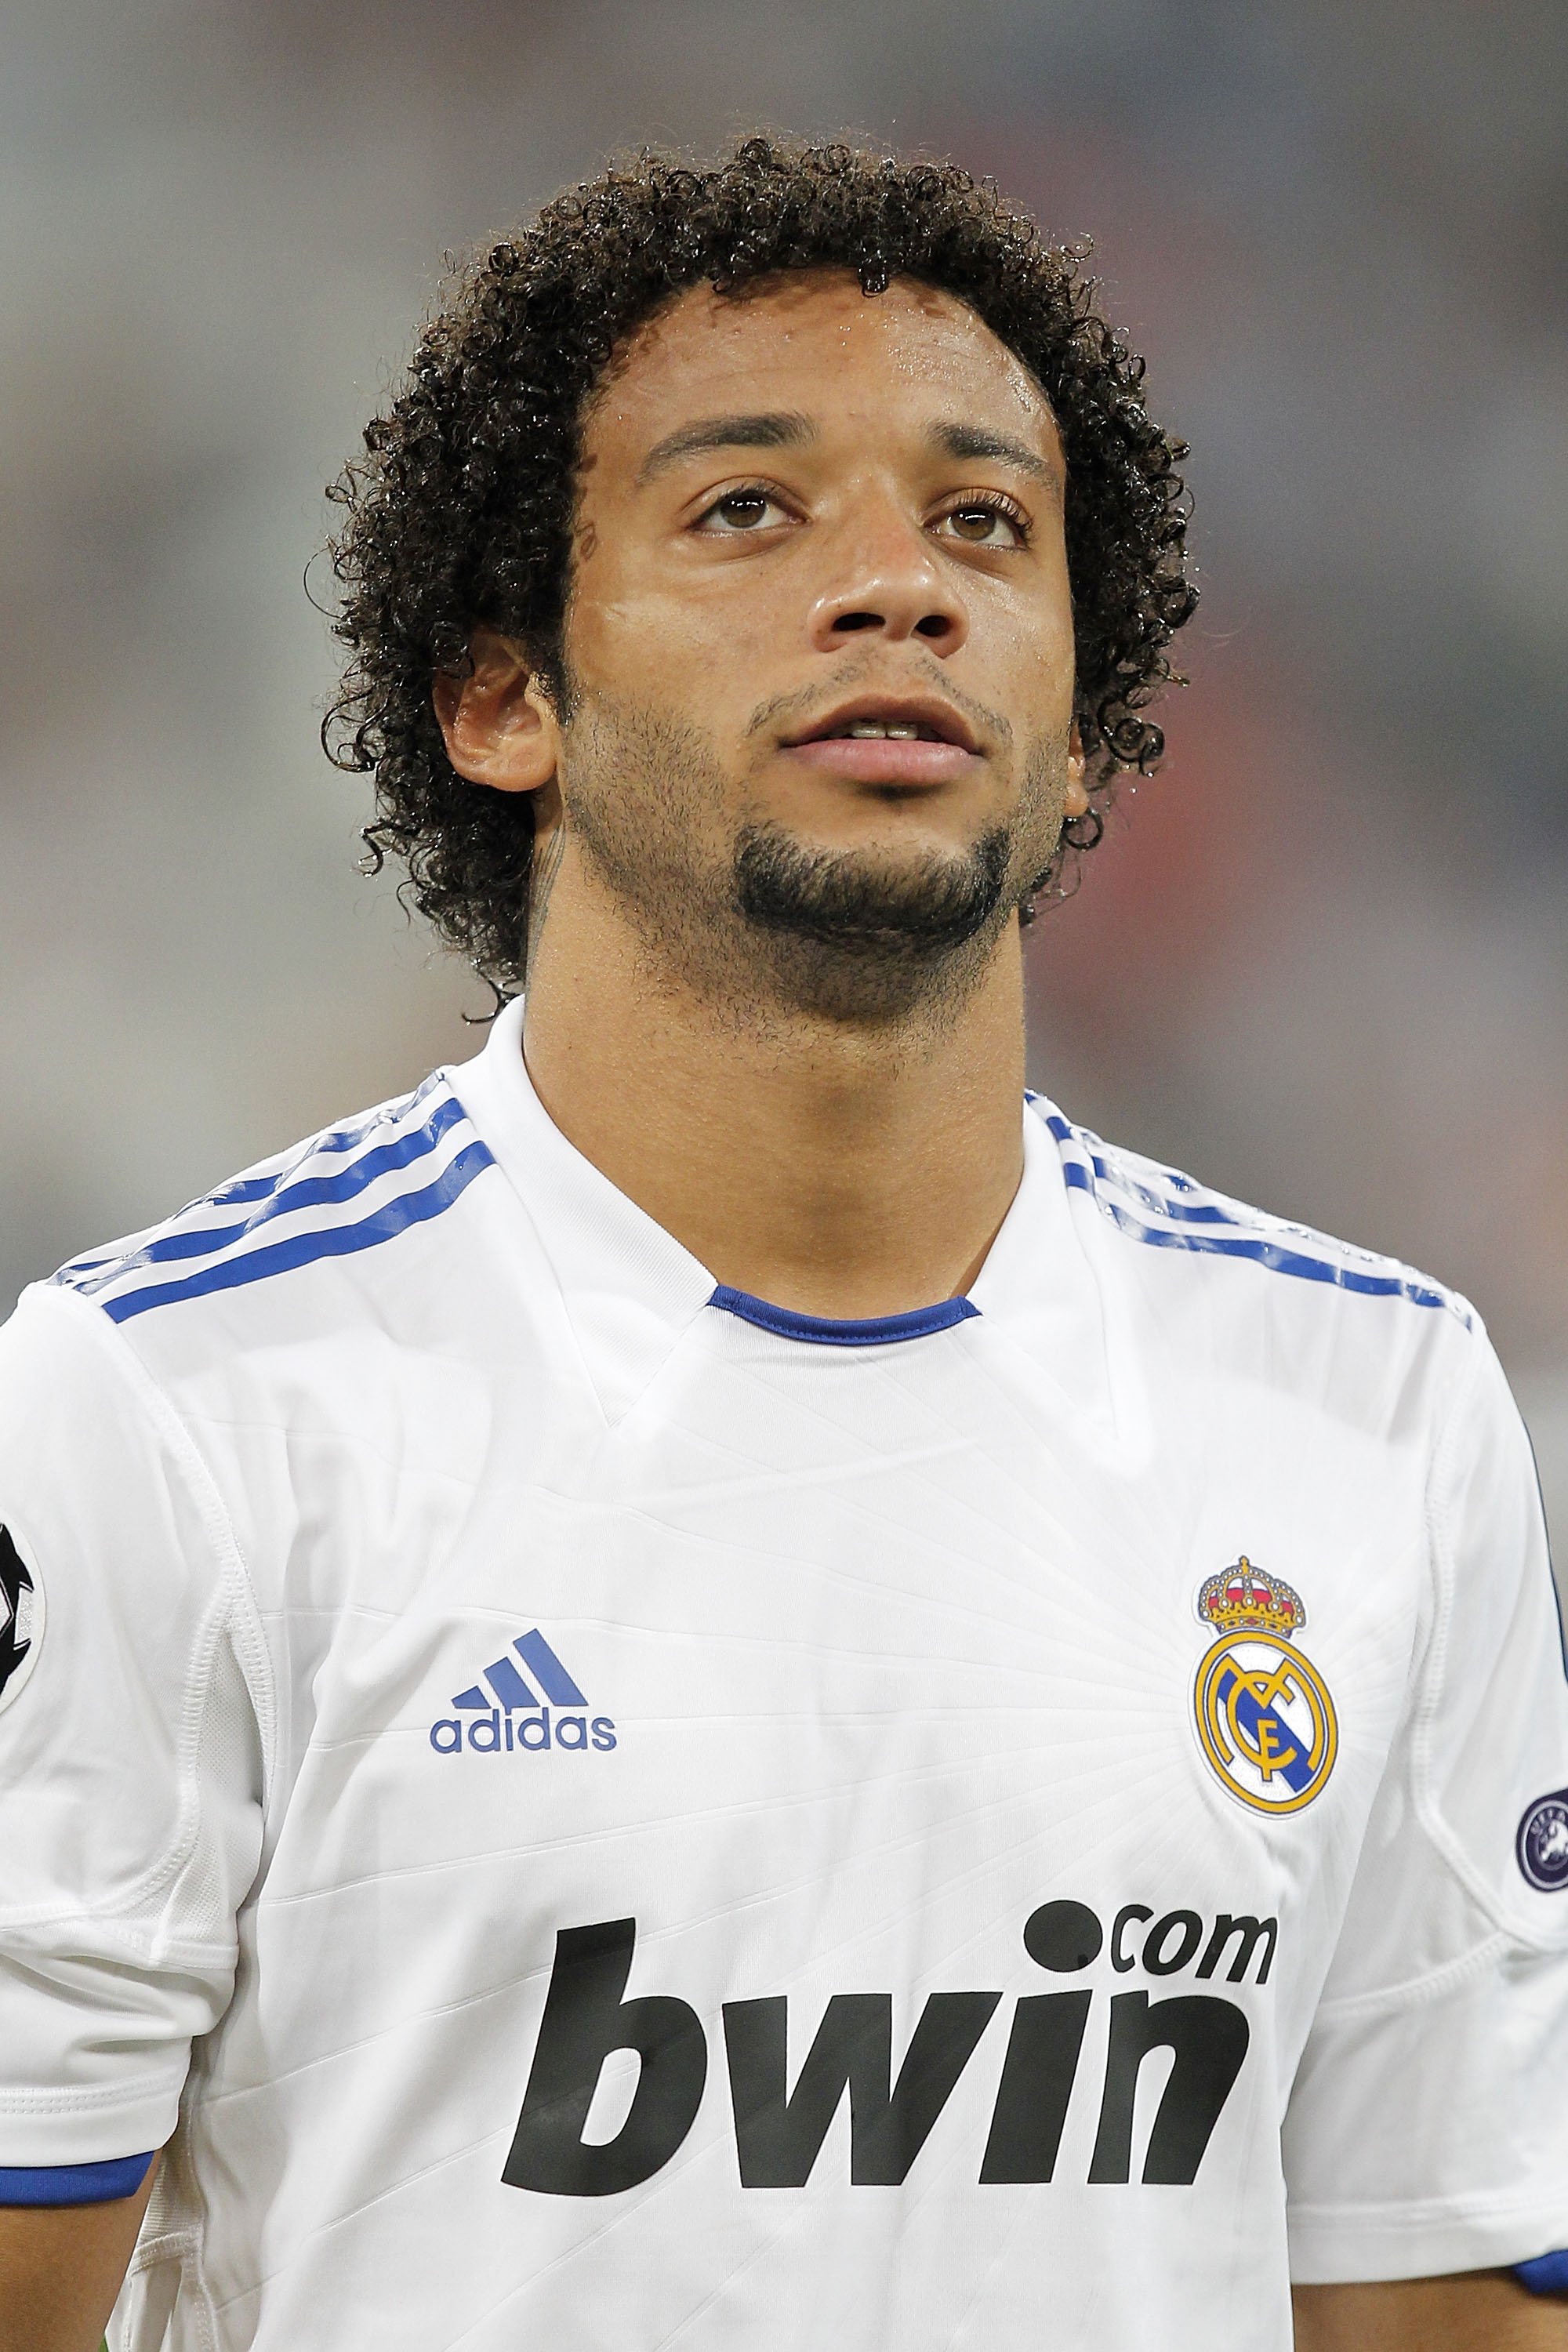 MADRID, SPAIN - SEPTEMBER 15:  Marcelo Vieira of Real Madrid watches on prior to the start of the UEFA Champions League group G match between Real Madrid and AFC Ajax at Estadio Santiago Bernabeu on September 15, 2010 in Madrid, Spain.  (Photo by Angel Ma